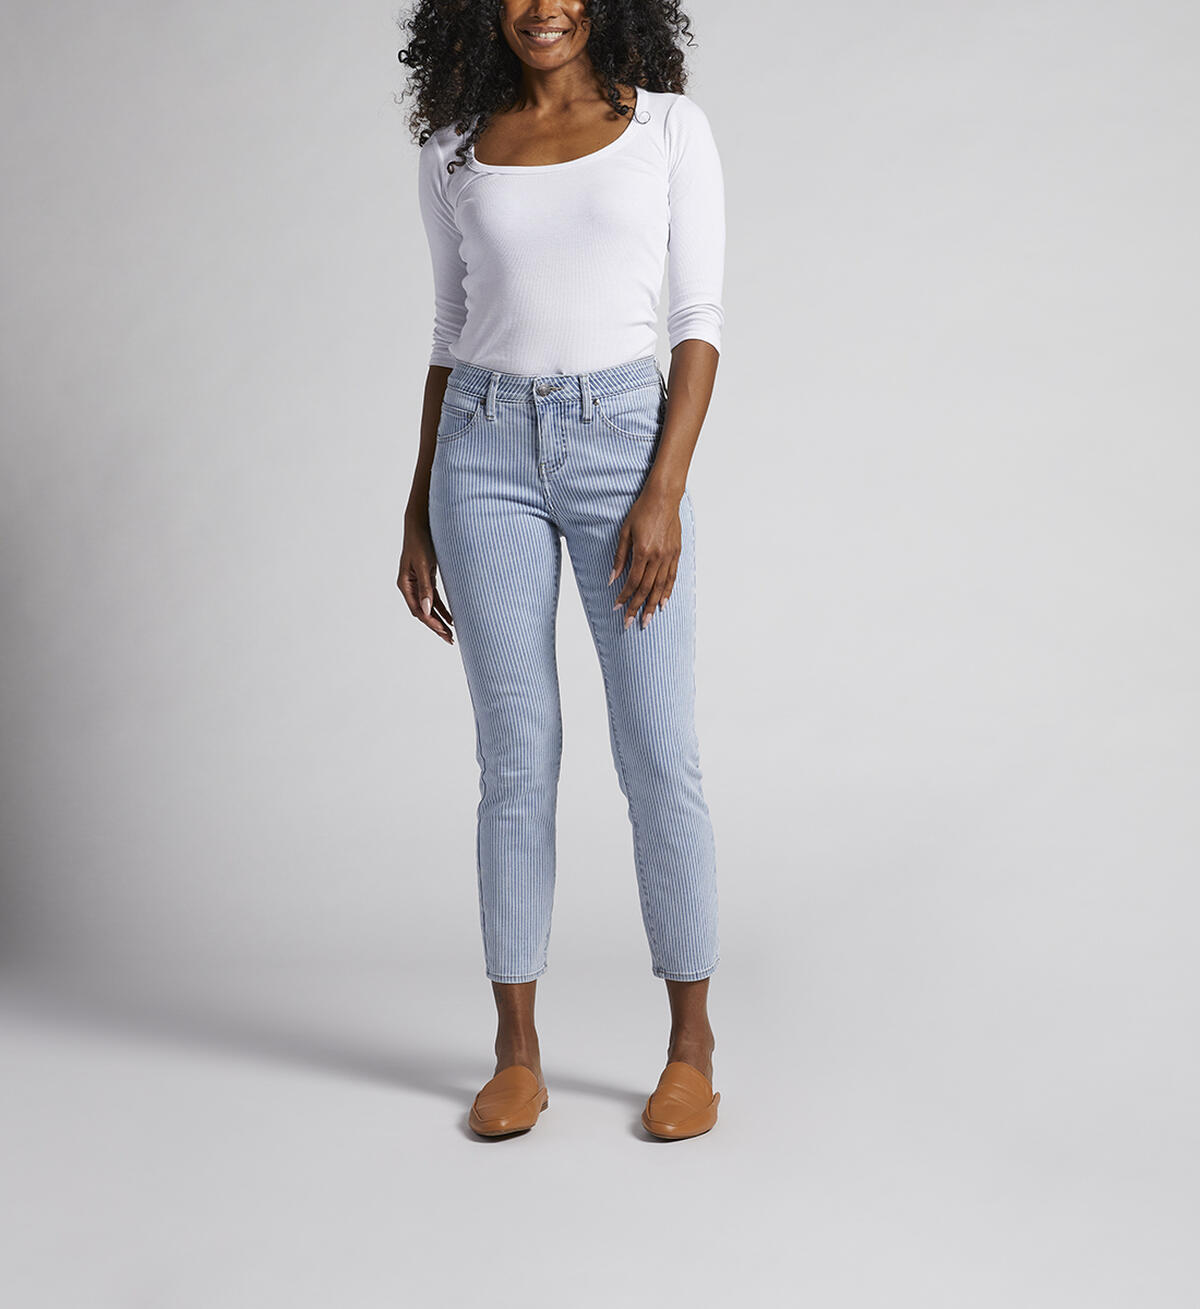 Cecilia Mid Rise Ankle Skinny Jeans, , hi-res image number 0